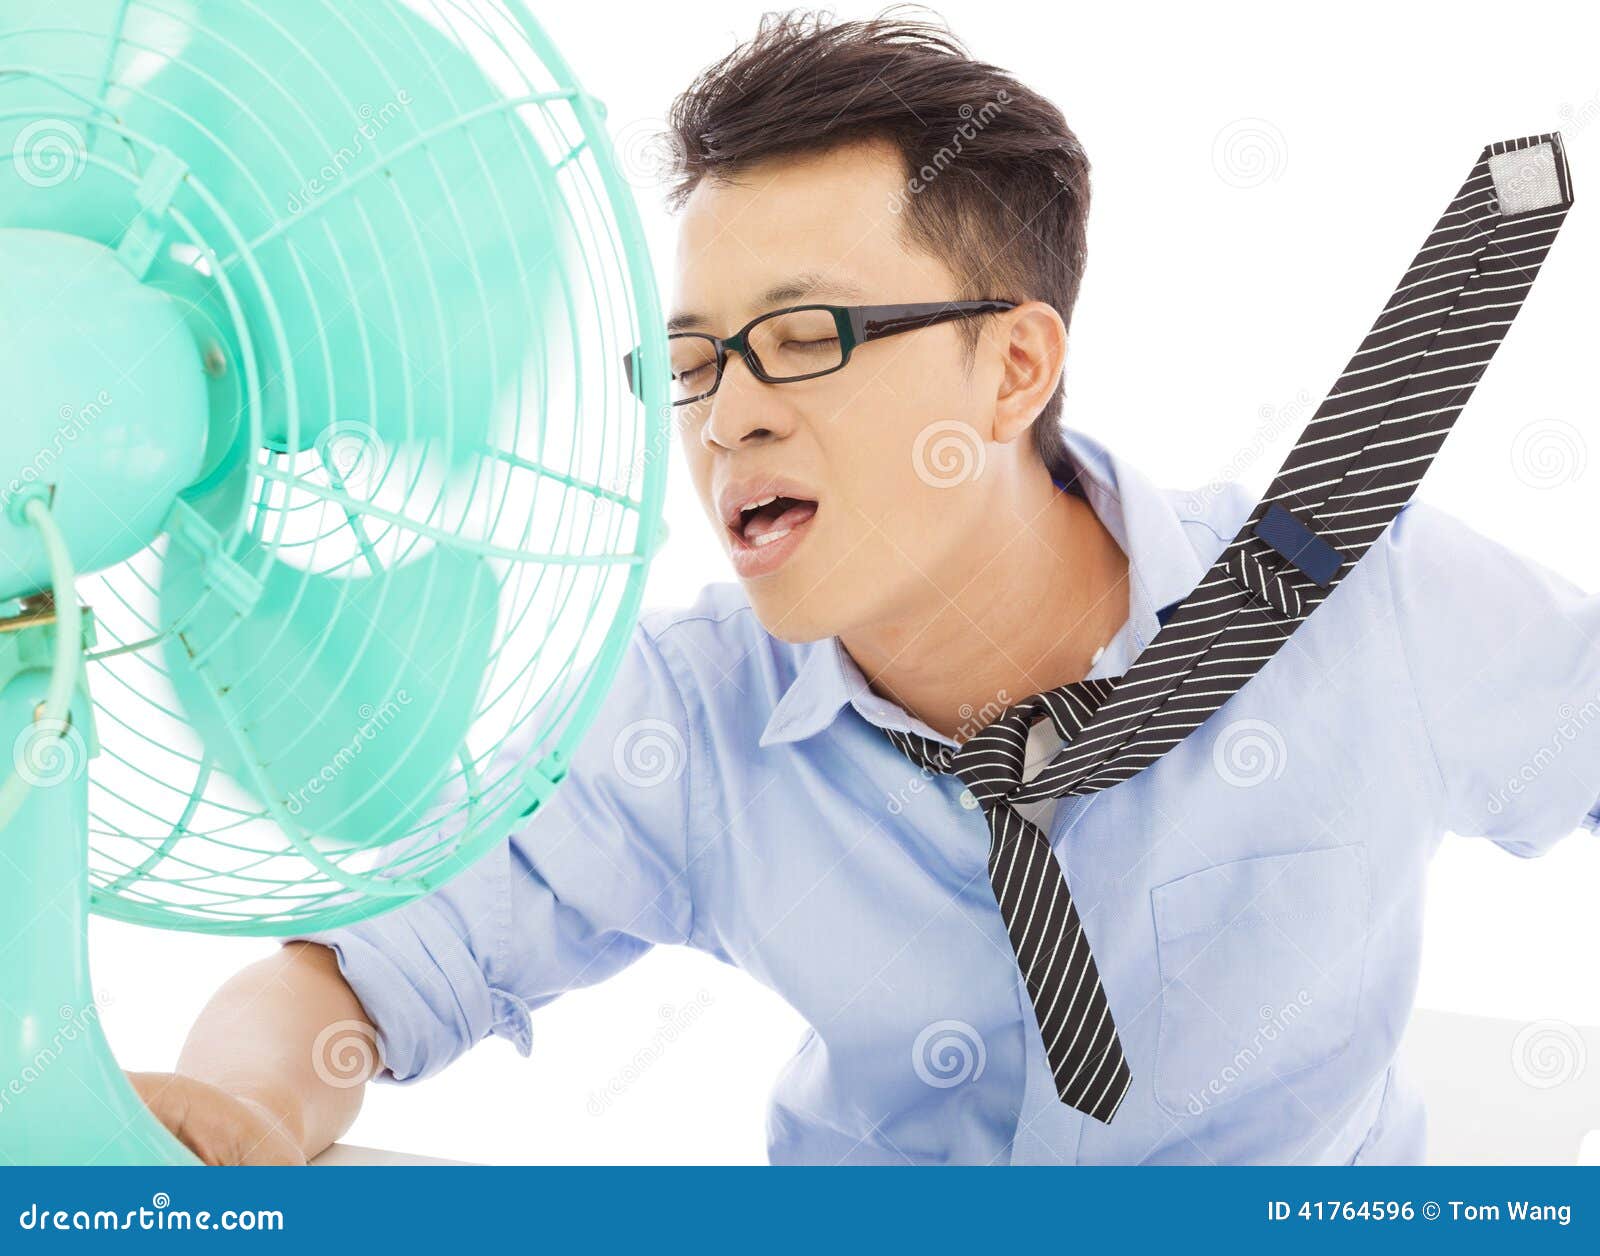 IMAGE(https://thumbs.dreamstime.com/z/young-man-cooling-face-under-wind-fan-summer-heat-41764596.jpg)